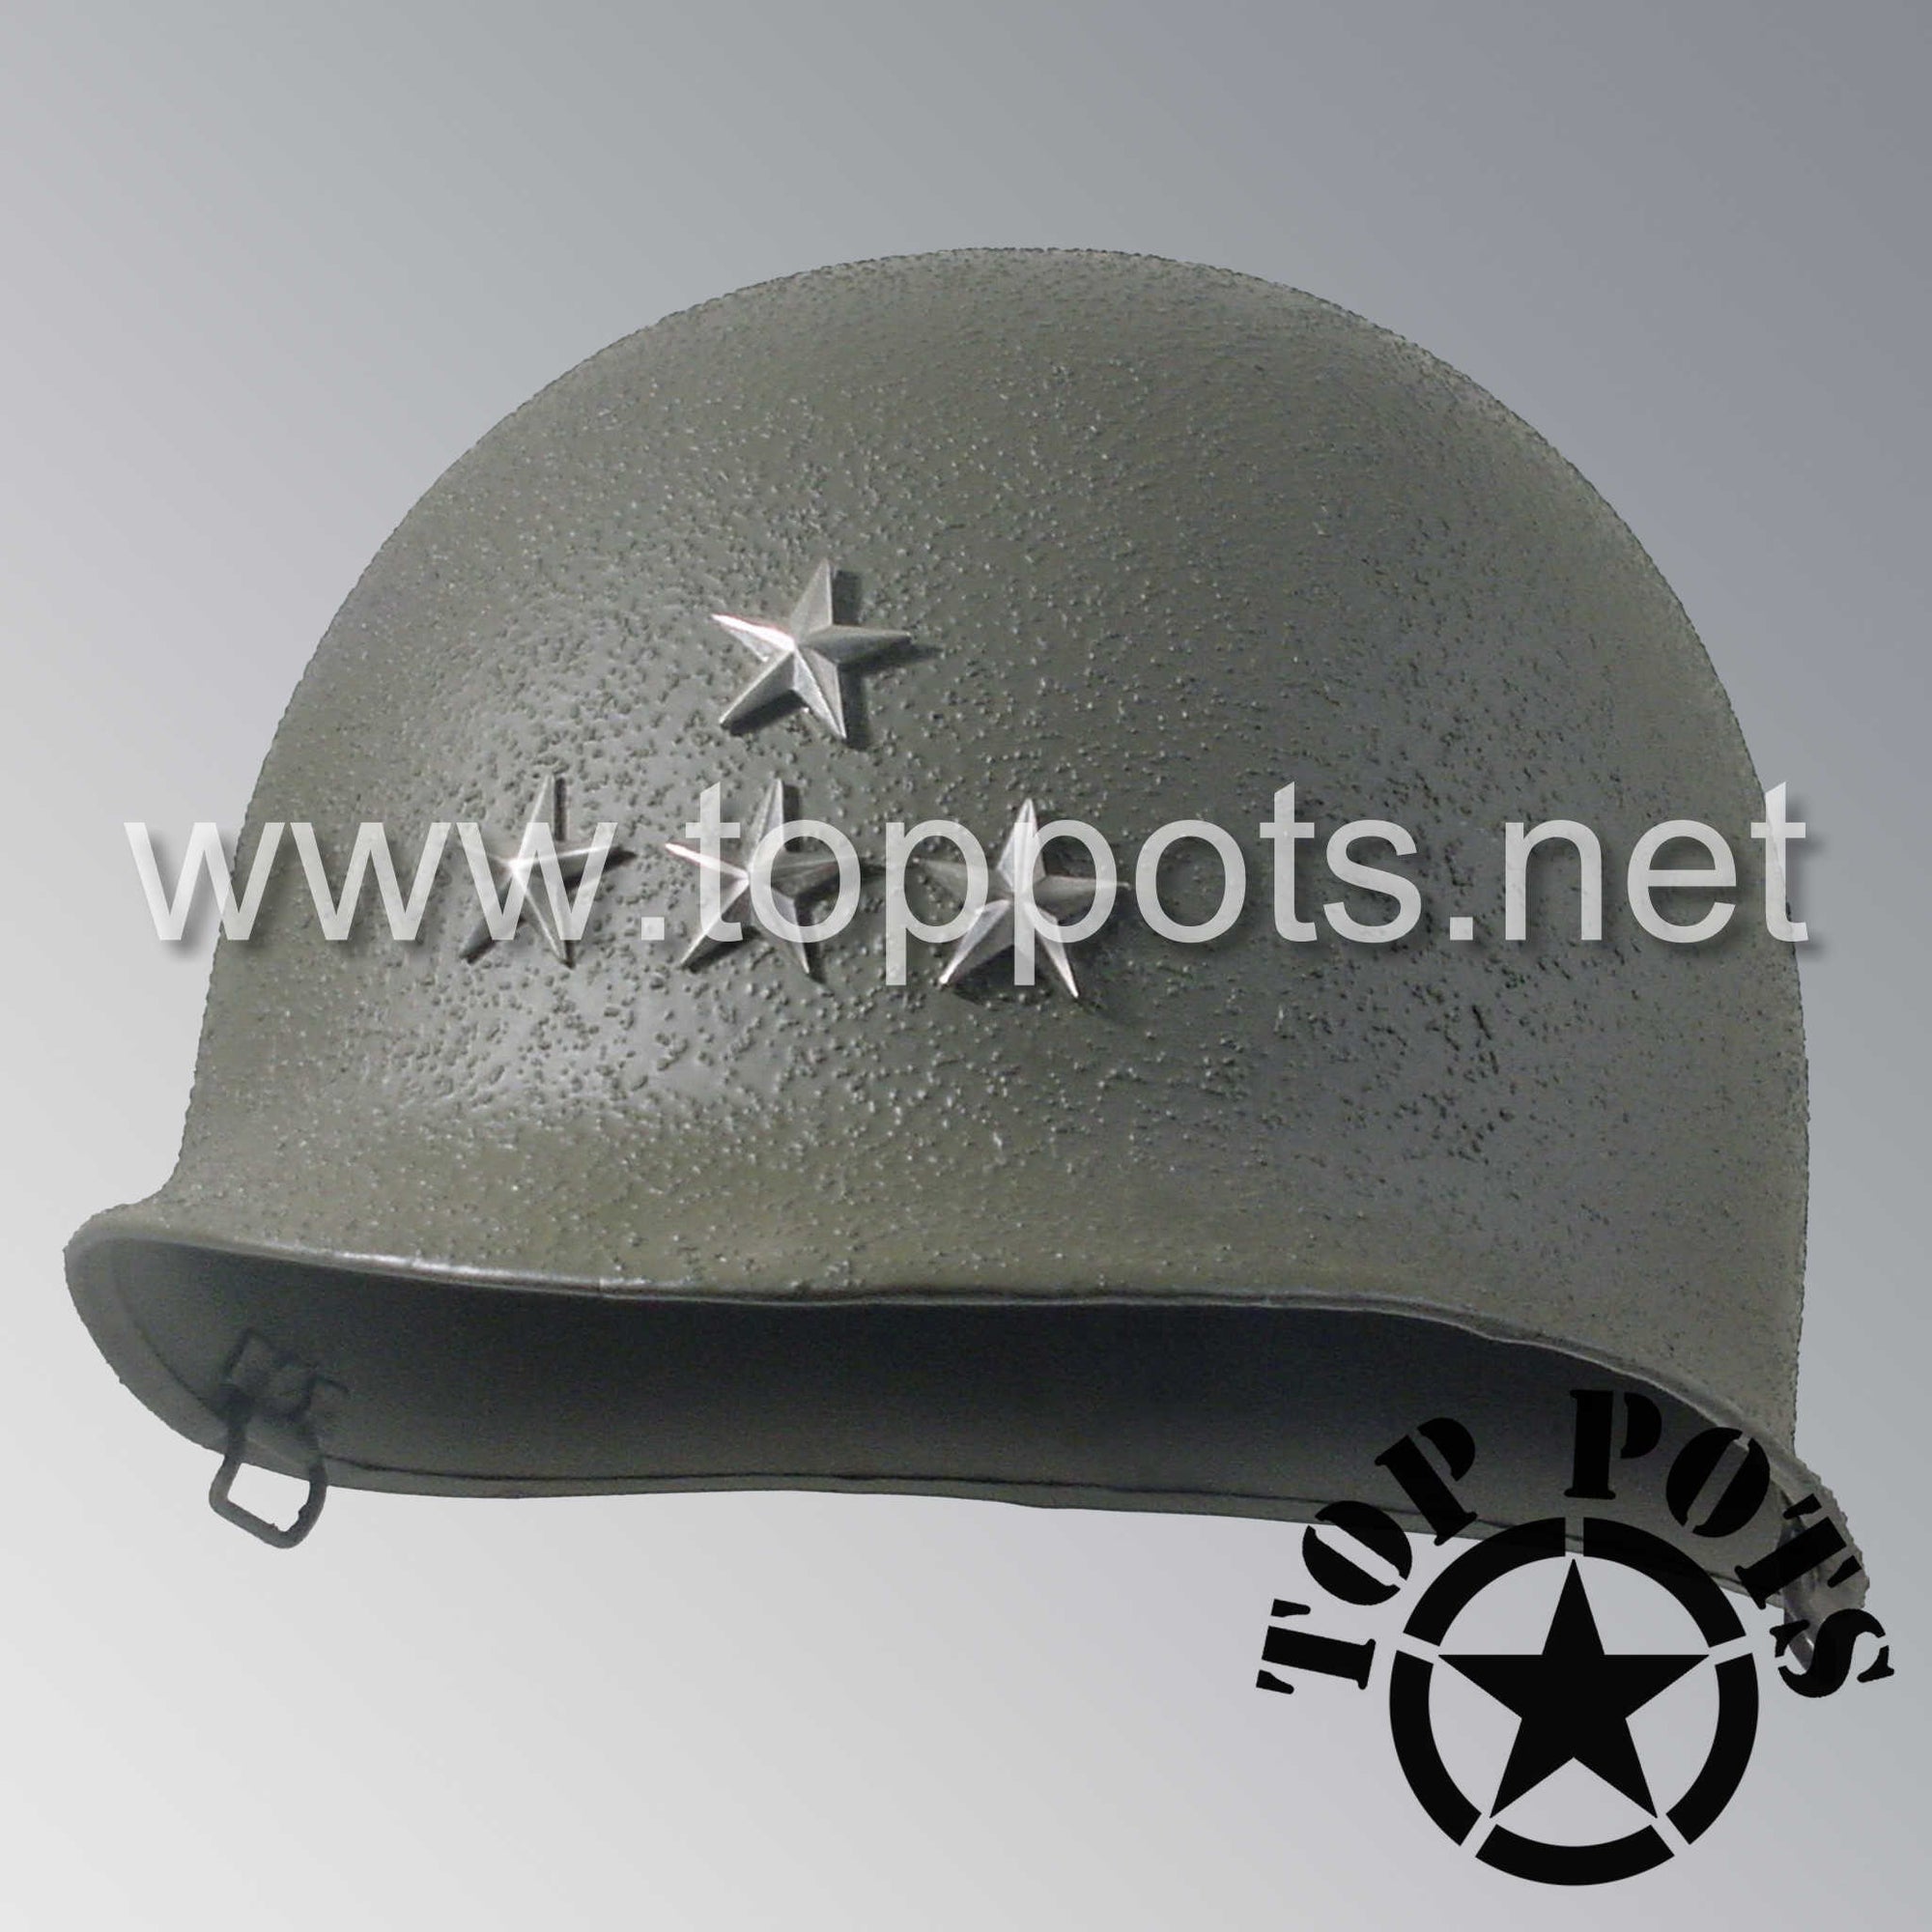 WWII US Army Restored Original M1 Infantry Helmet Swivel Bale Shell with 3rd Army General Patton Rank